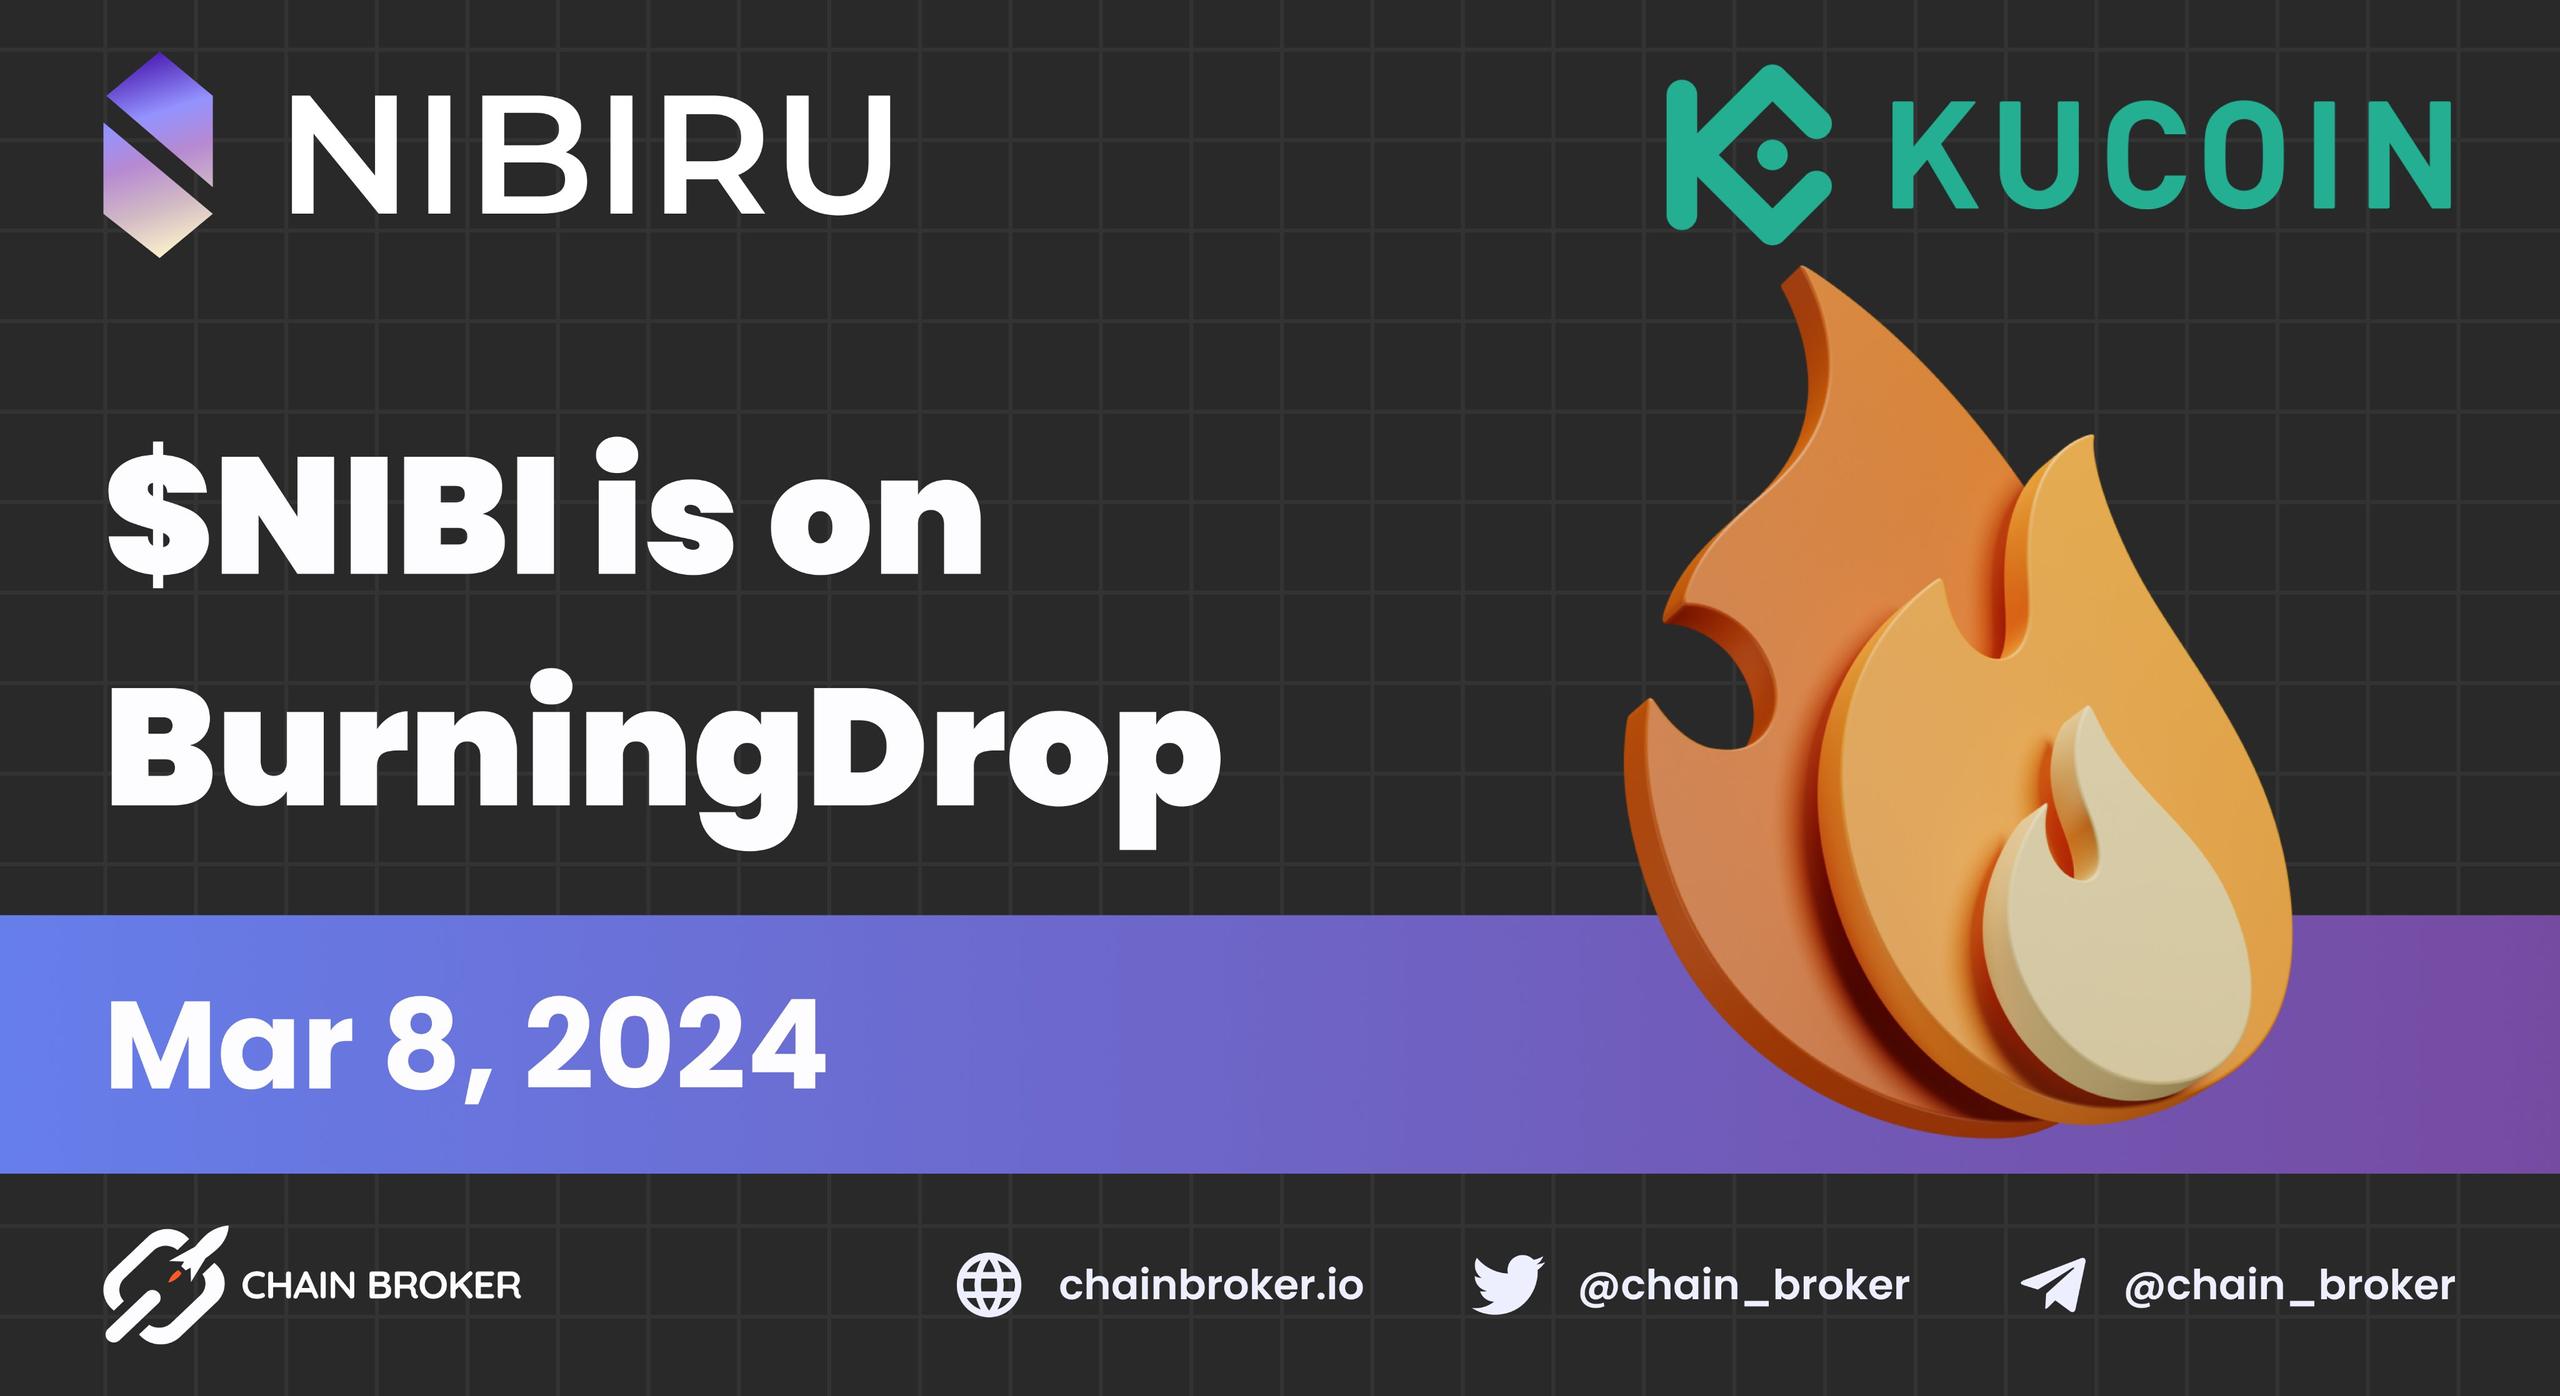 $NIBI is now available on BurningDrop